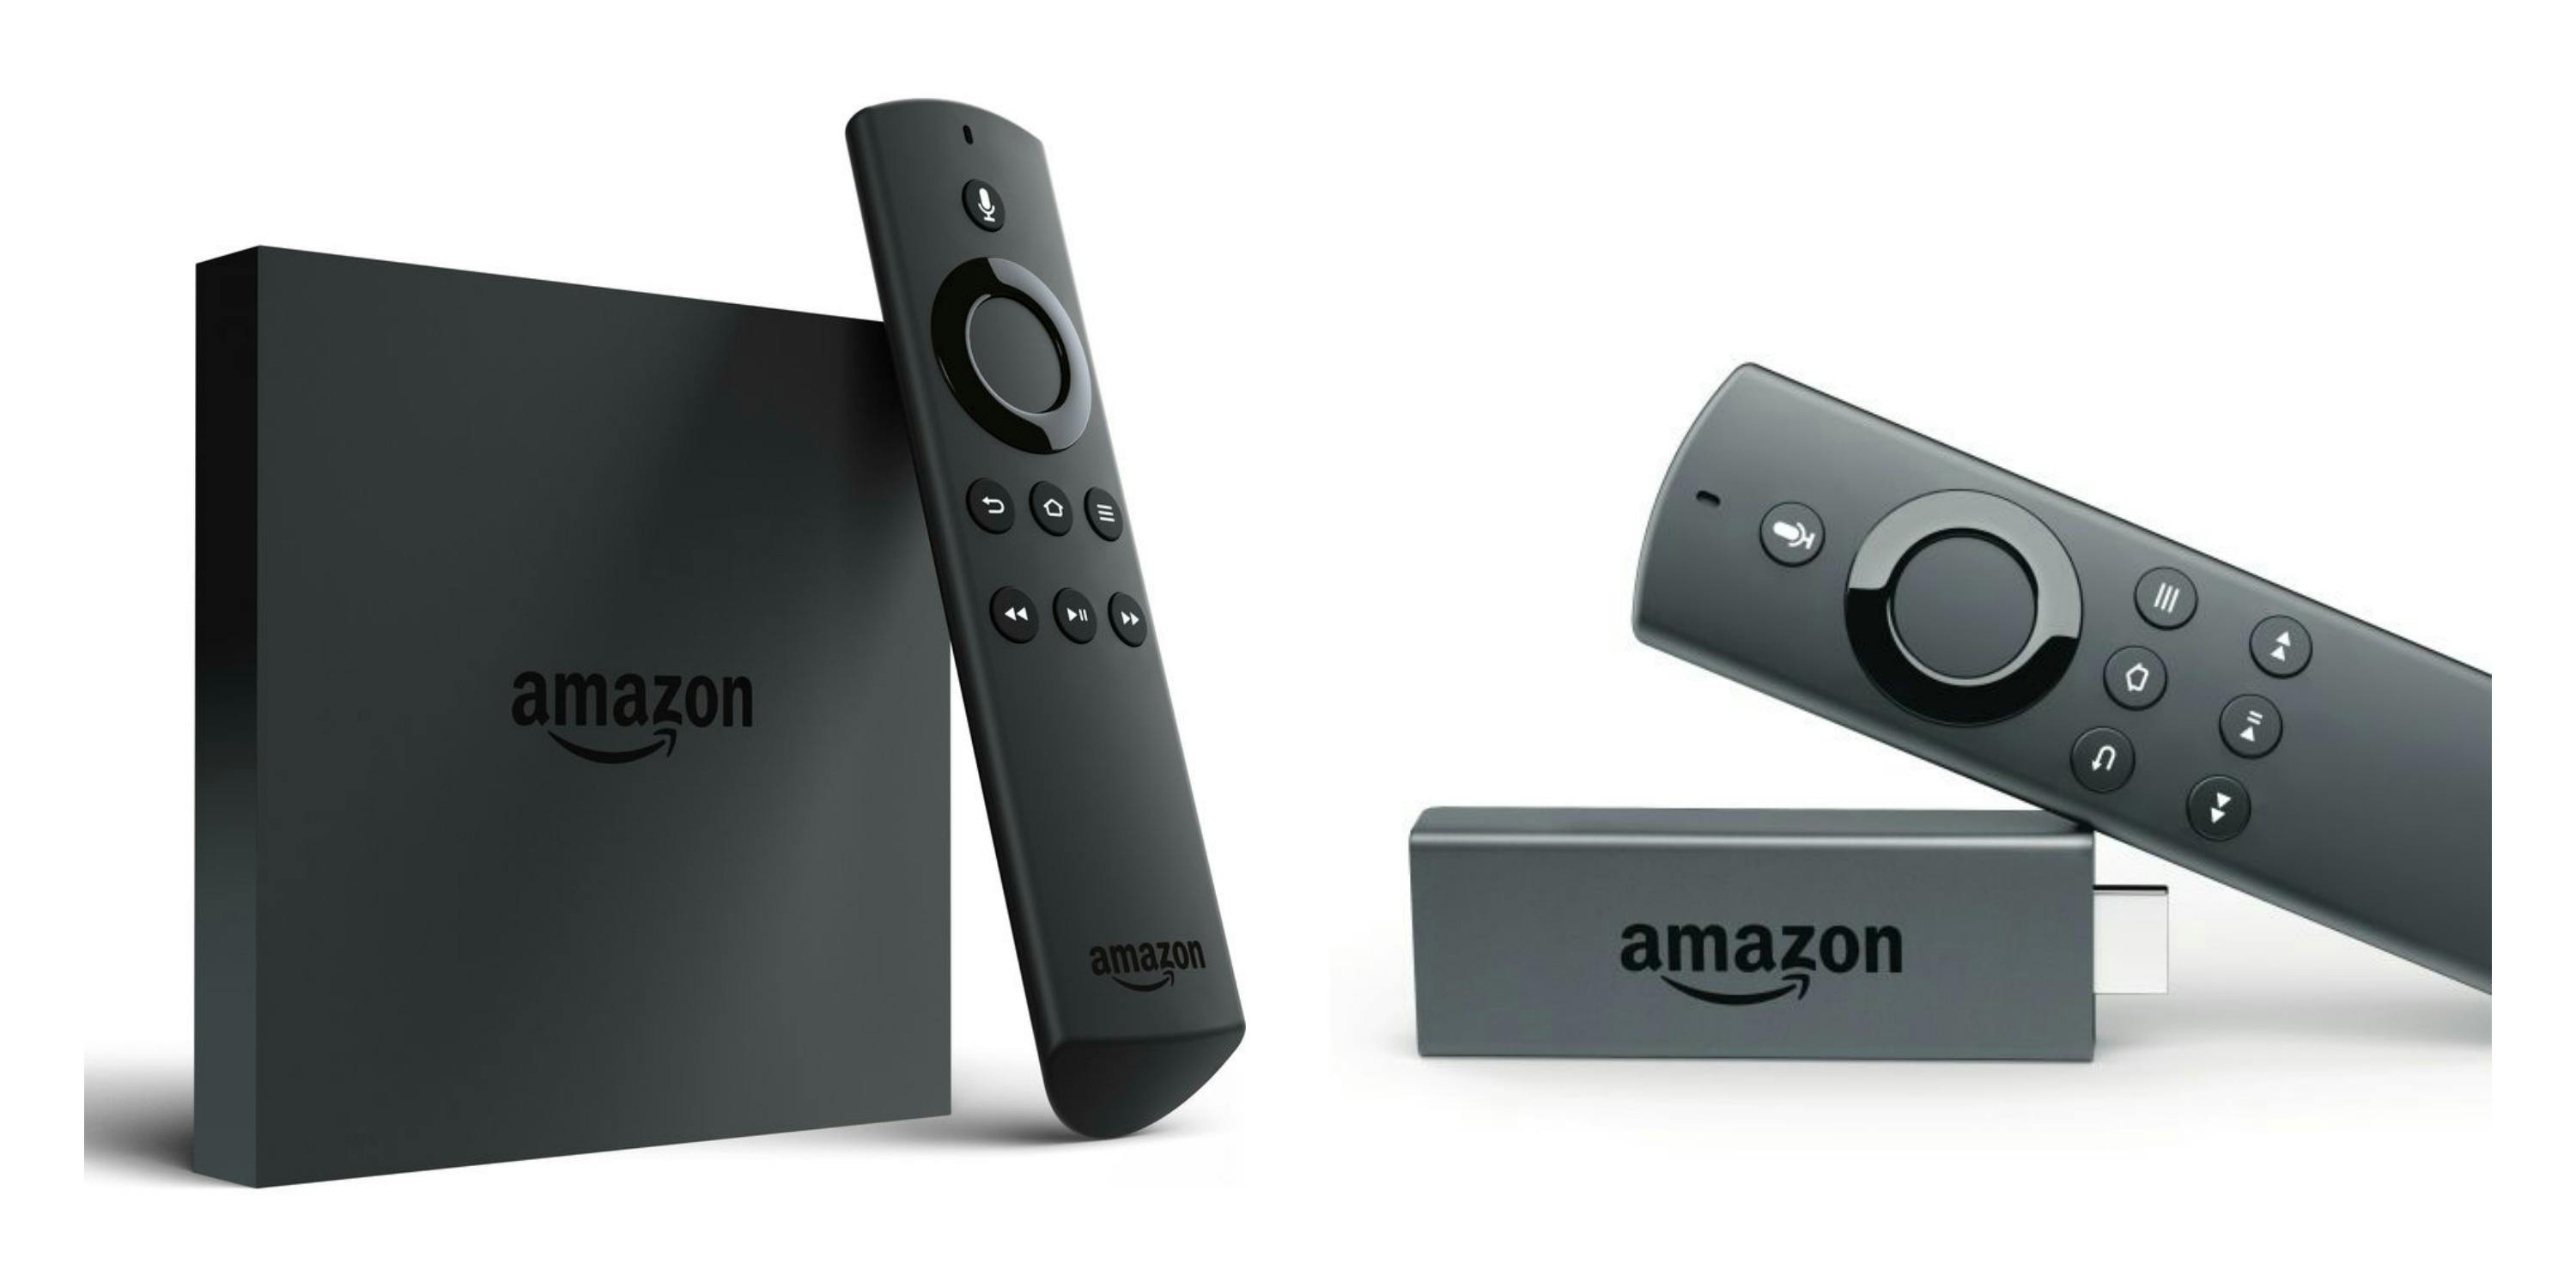 Fire TV: More Than 150 Million Devices Sold to Date,  Says